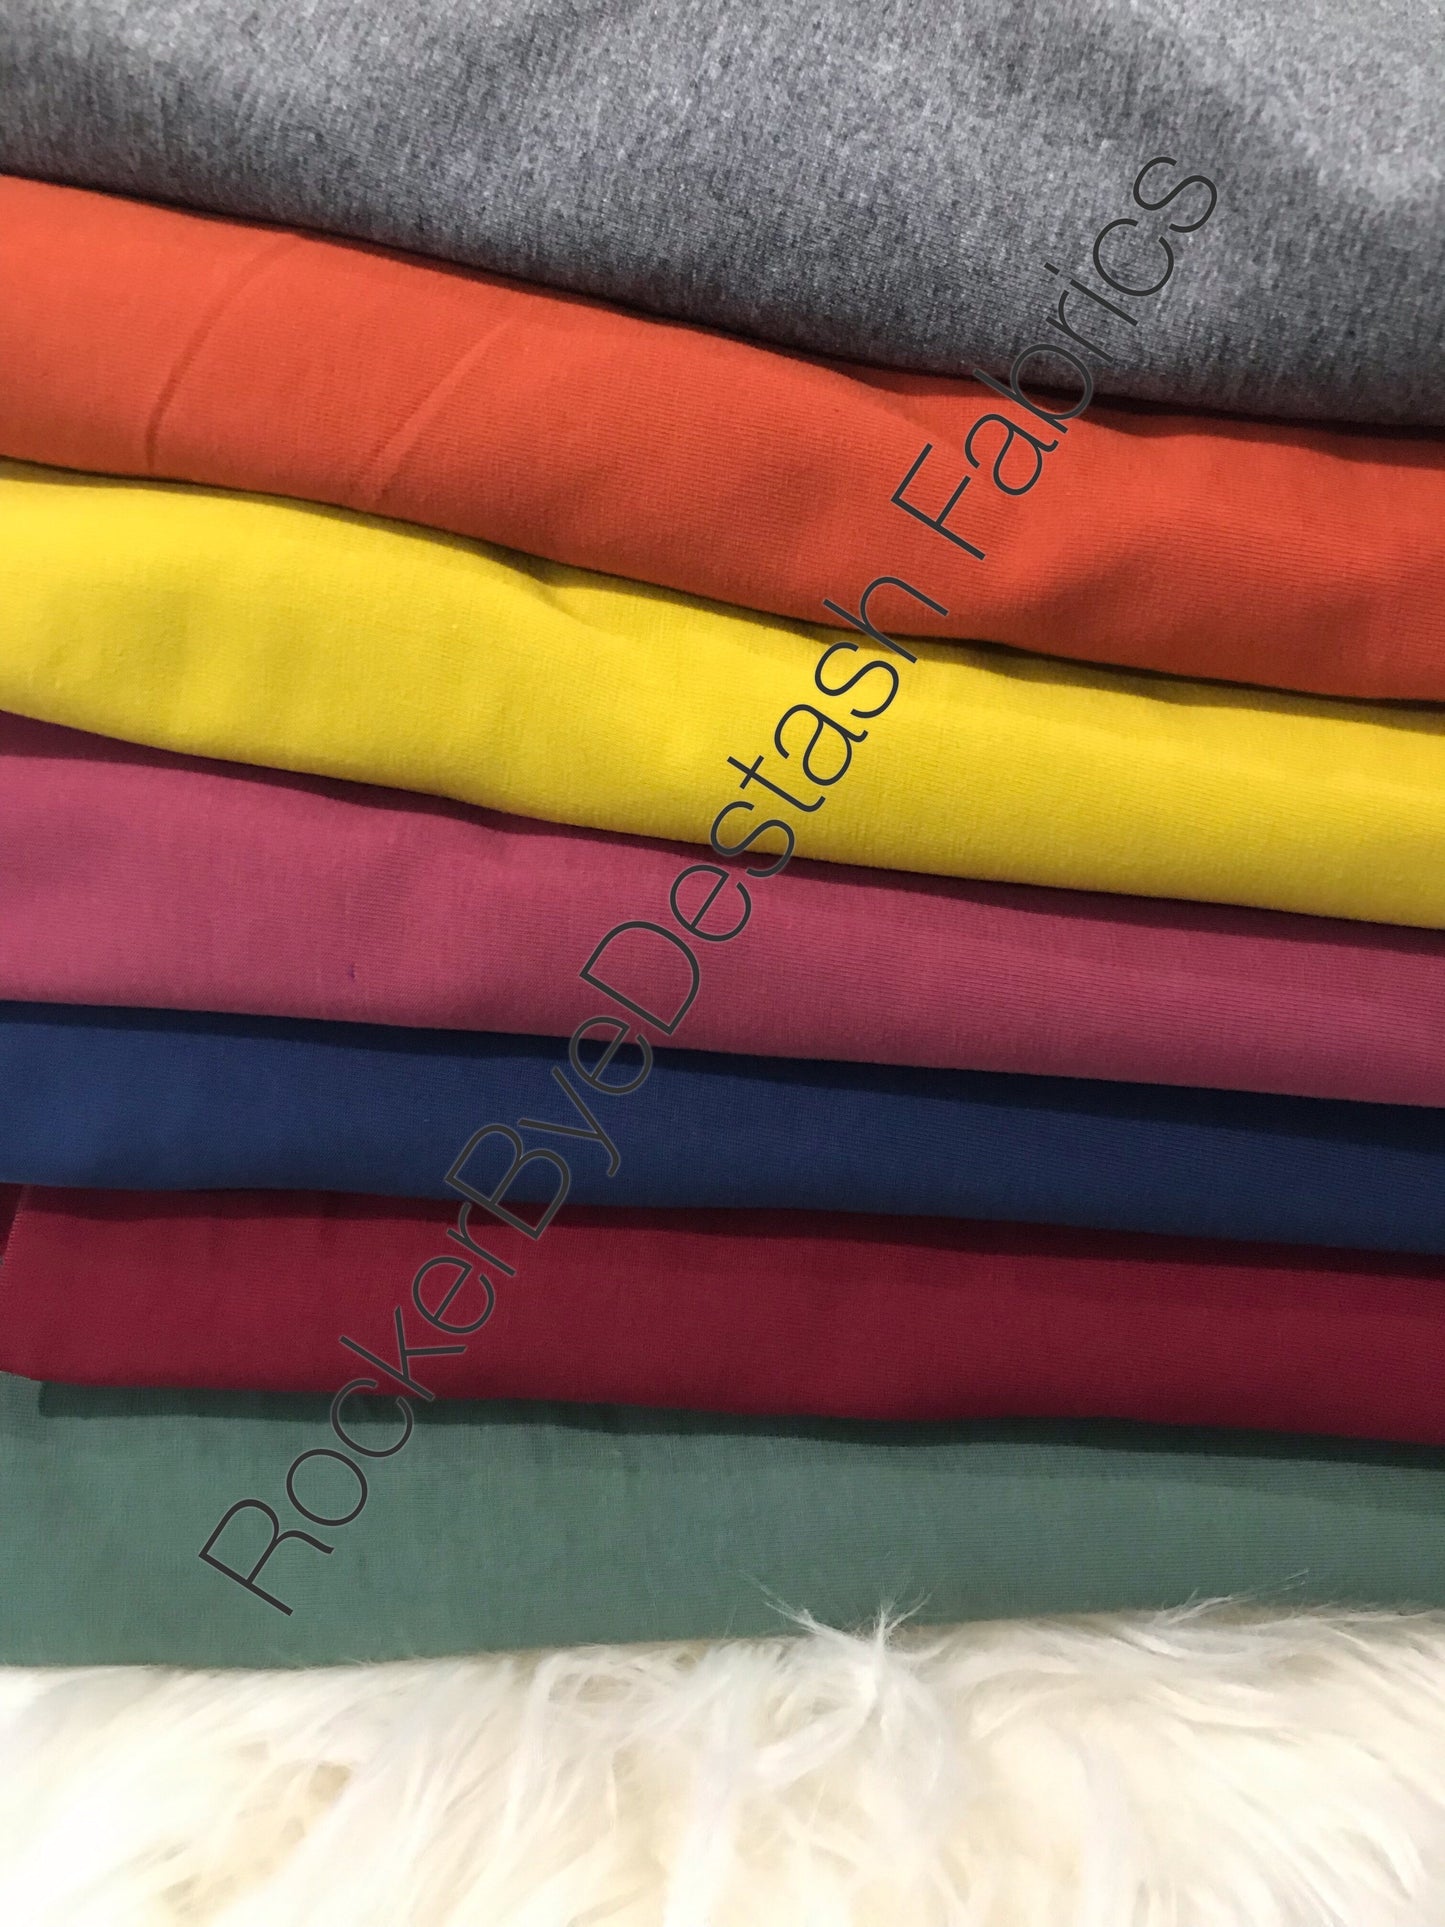 Cotton Lycra Solids - 220gsm Extra Wide - Retail